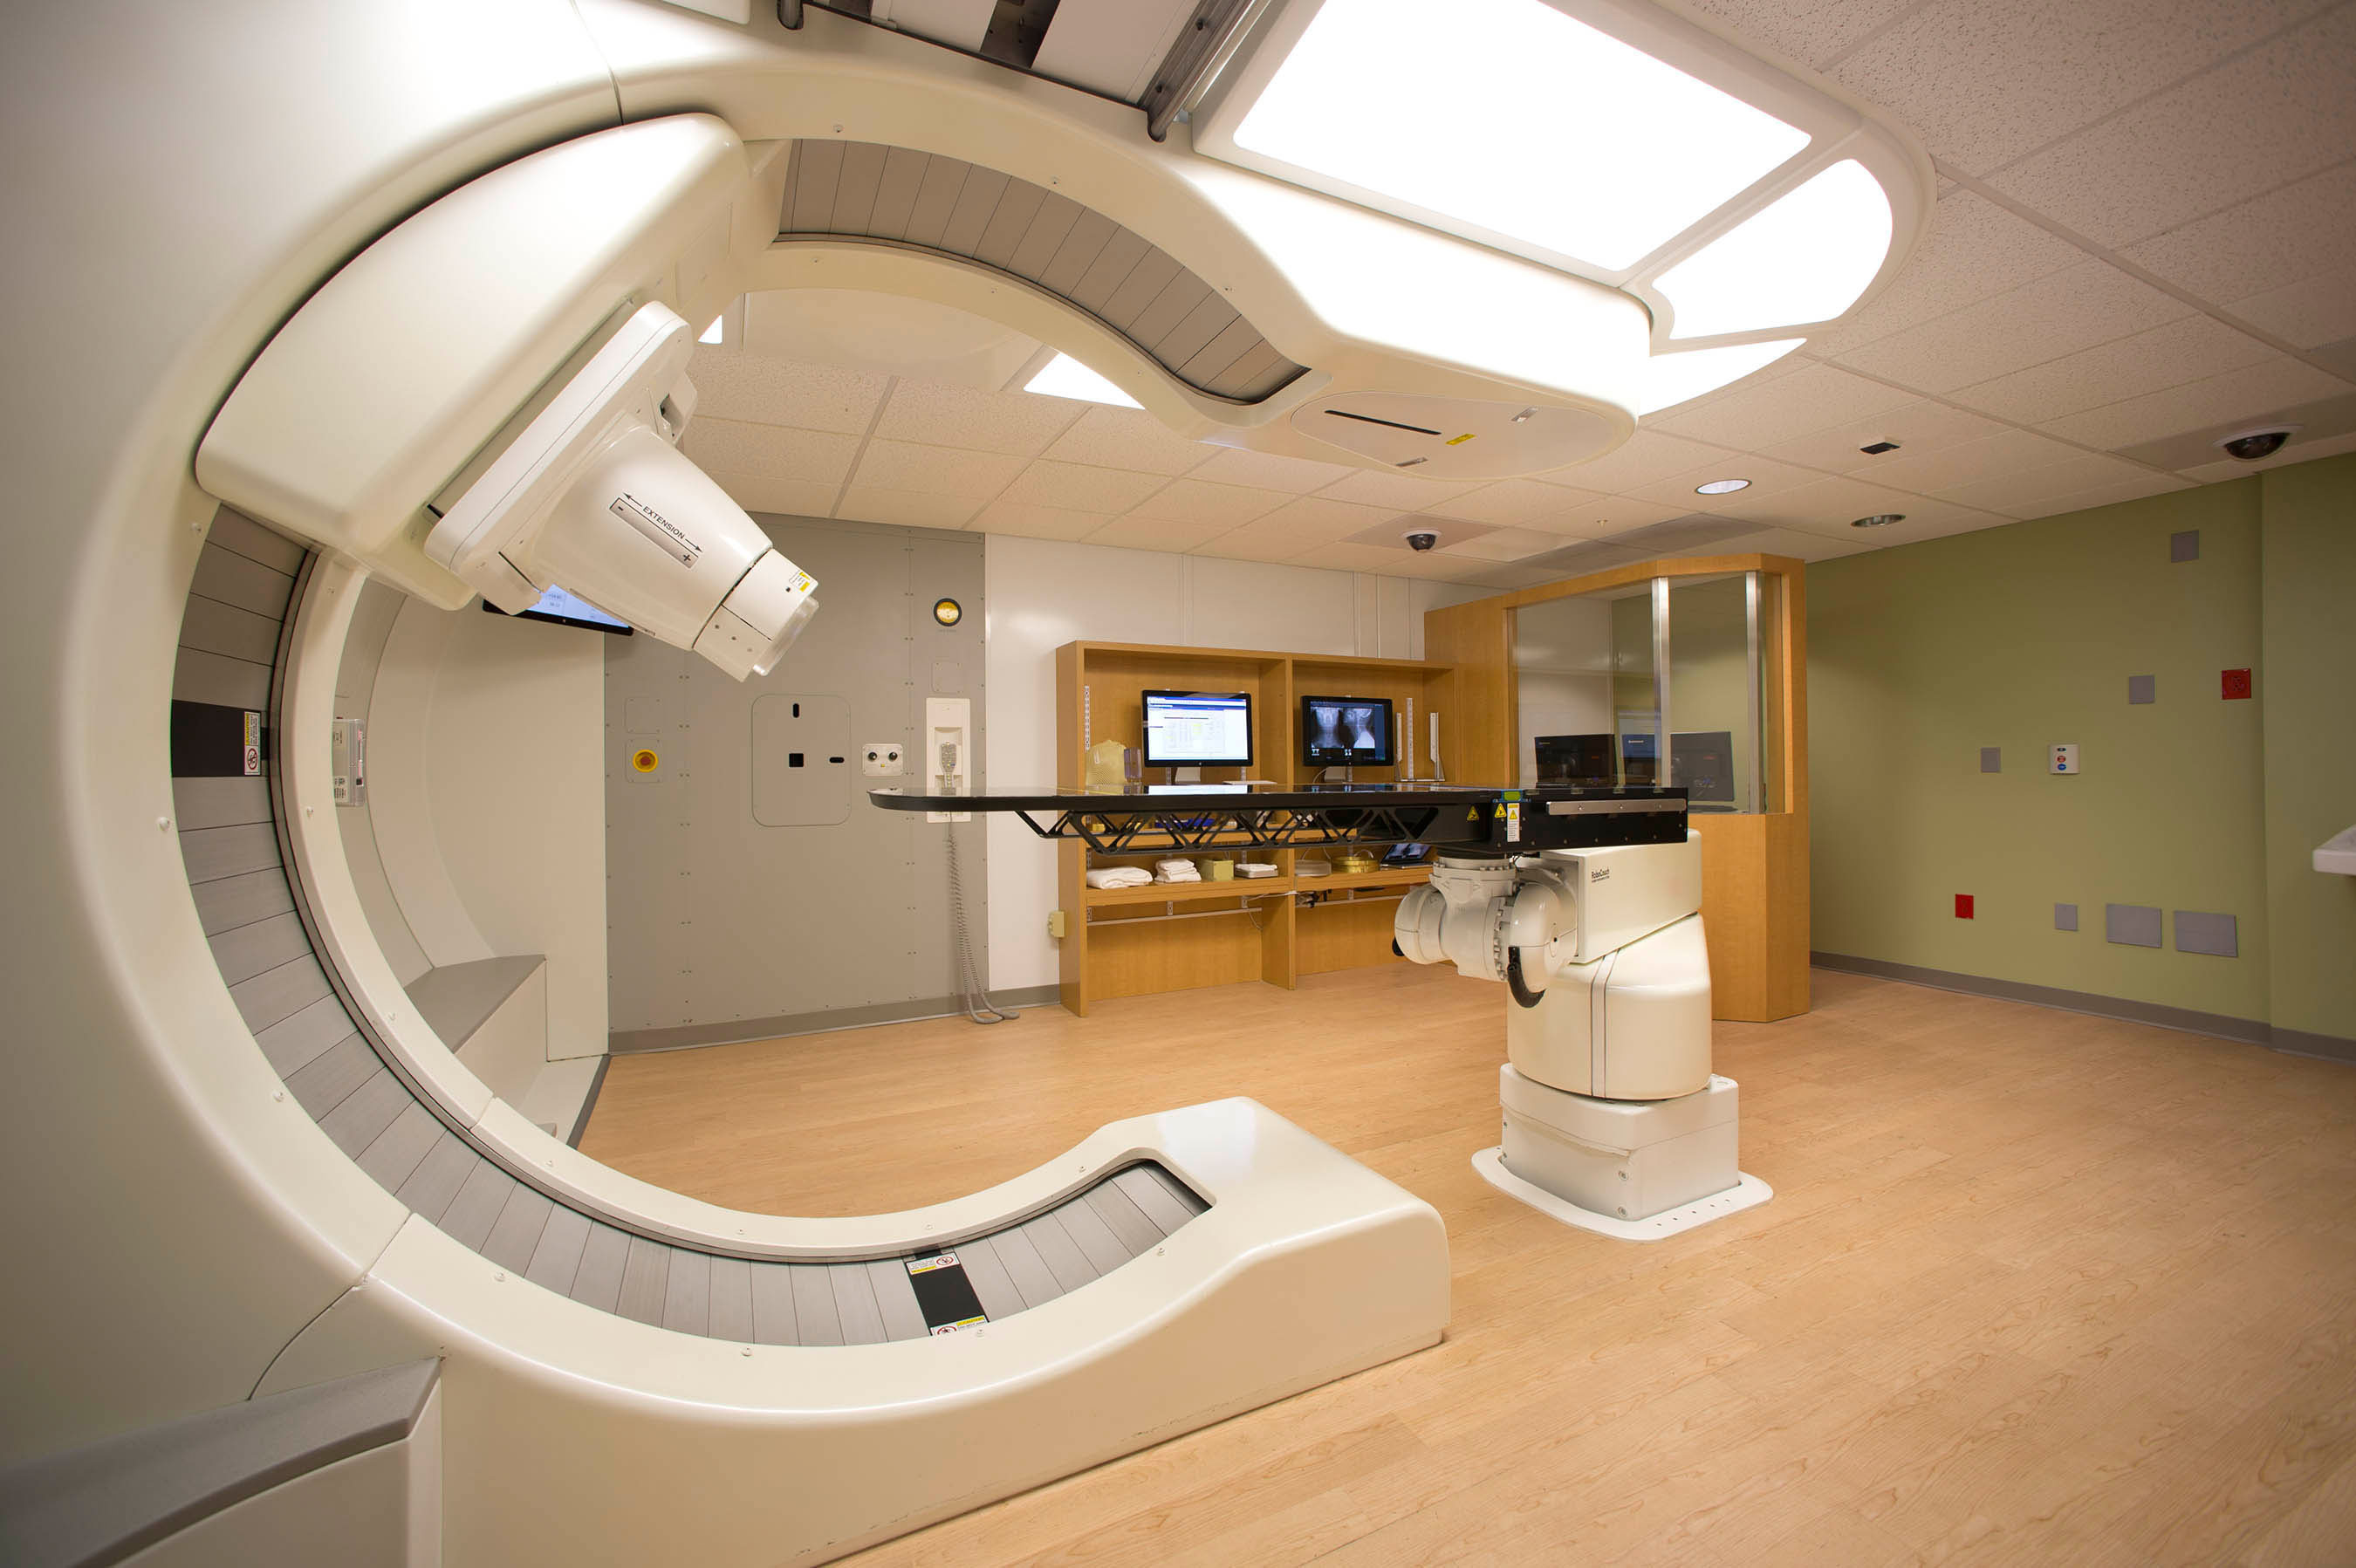 University Hospitals Seidman Cancer Center in Cleveland is breaking ground on a $30 million proton therapy center, becoming one of an elite group of cancer centers in the U.S. to offer this revolutionary technology. (PRNewsFoto/University Hospitals) (PRNewsFoto/UNIVERSITY HOSPITALS)